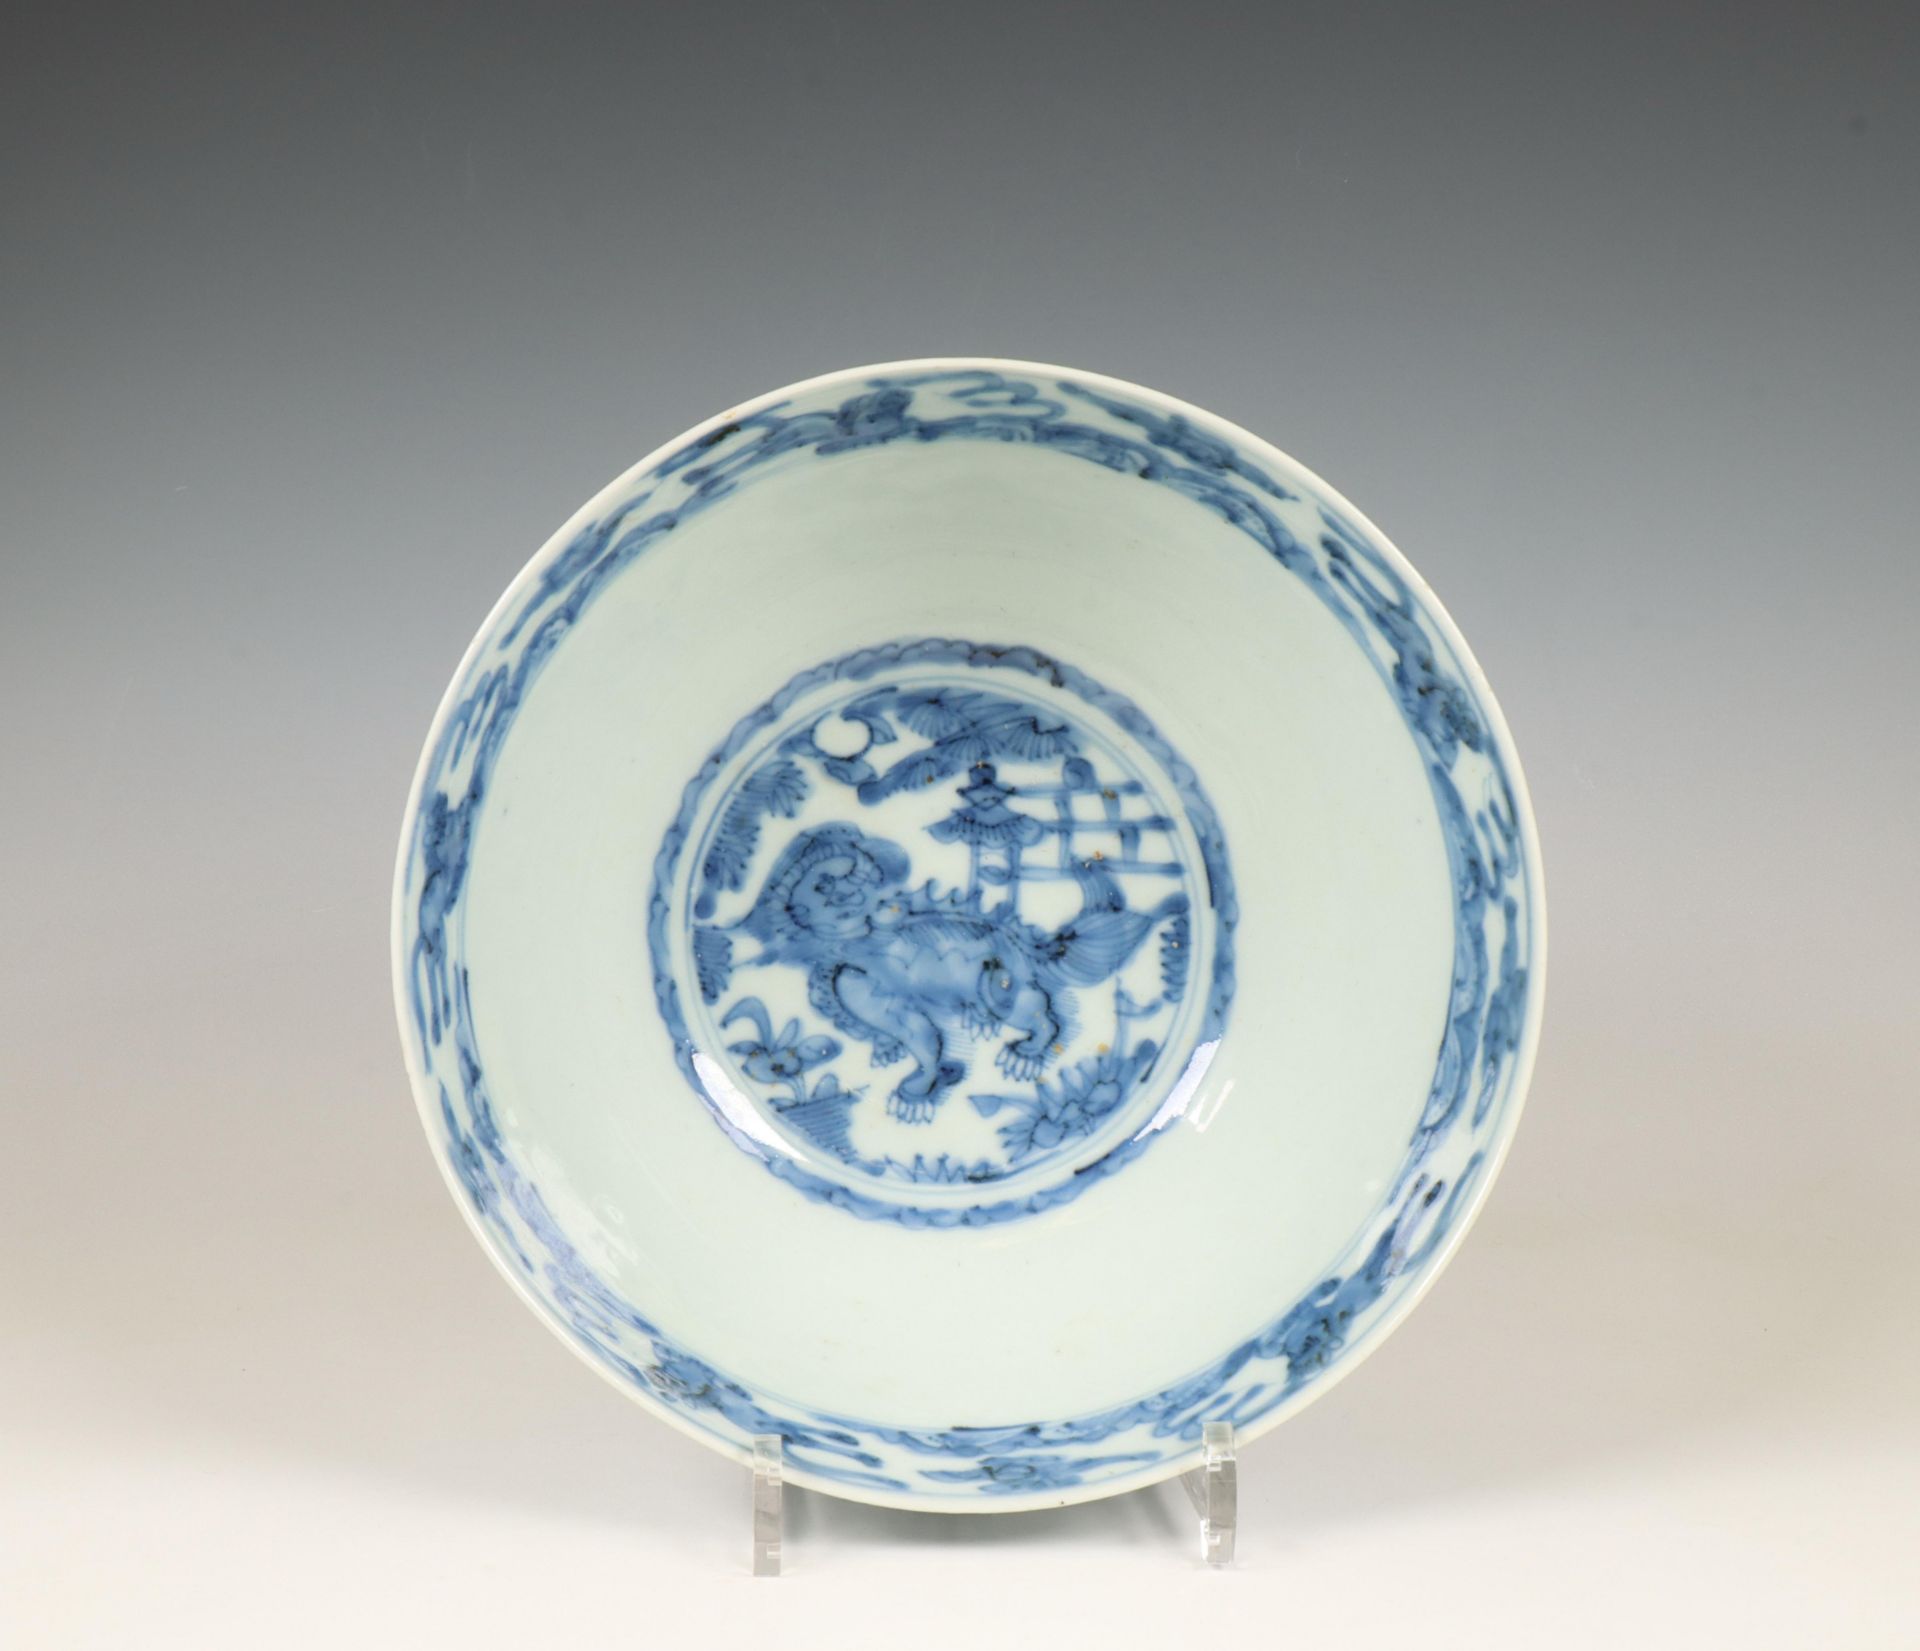 China, a blue and white porcelain bowl, late Ming dynasty (1368-1644), - Image 4 of 11